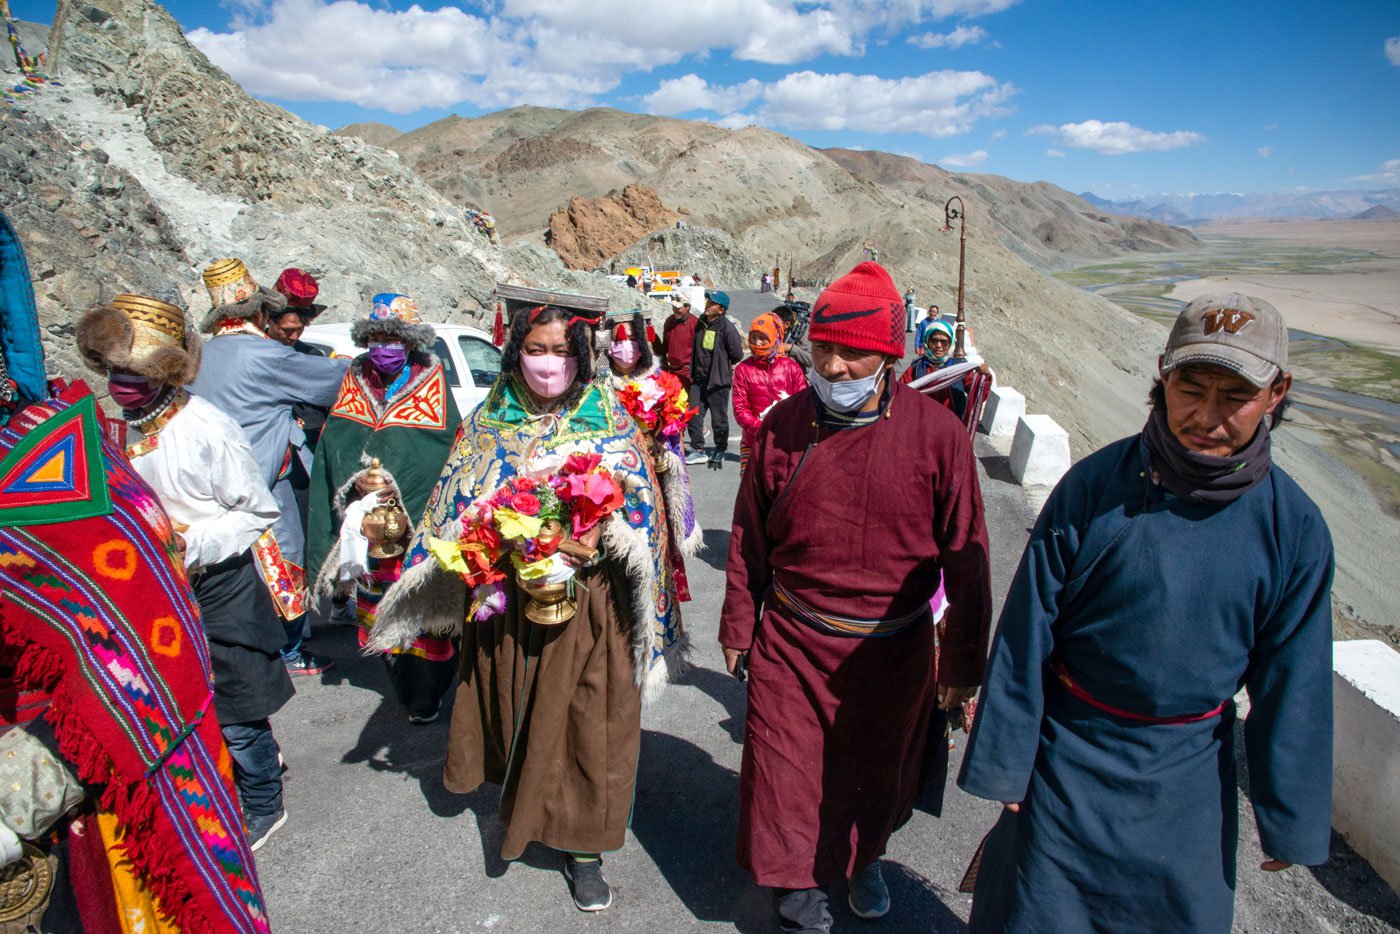 The procession of devotees from the six hamlets walk through the corridor into the monastery